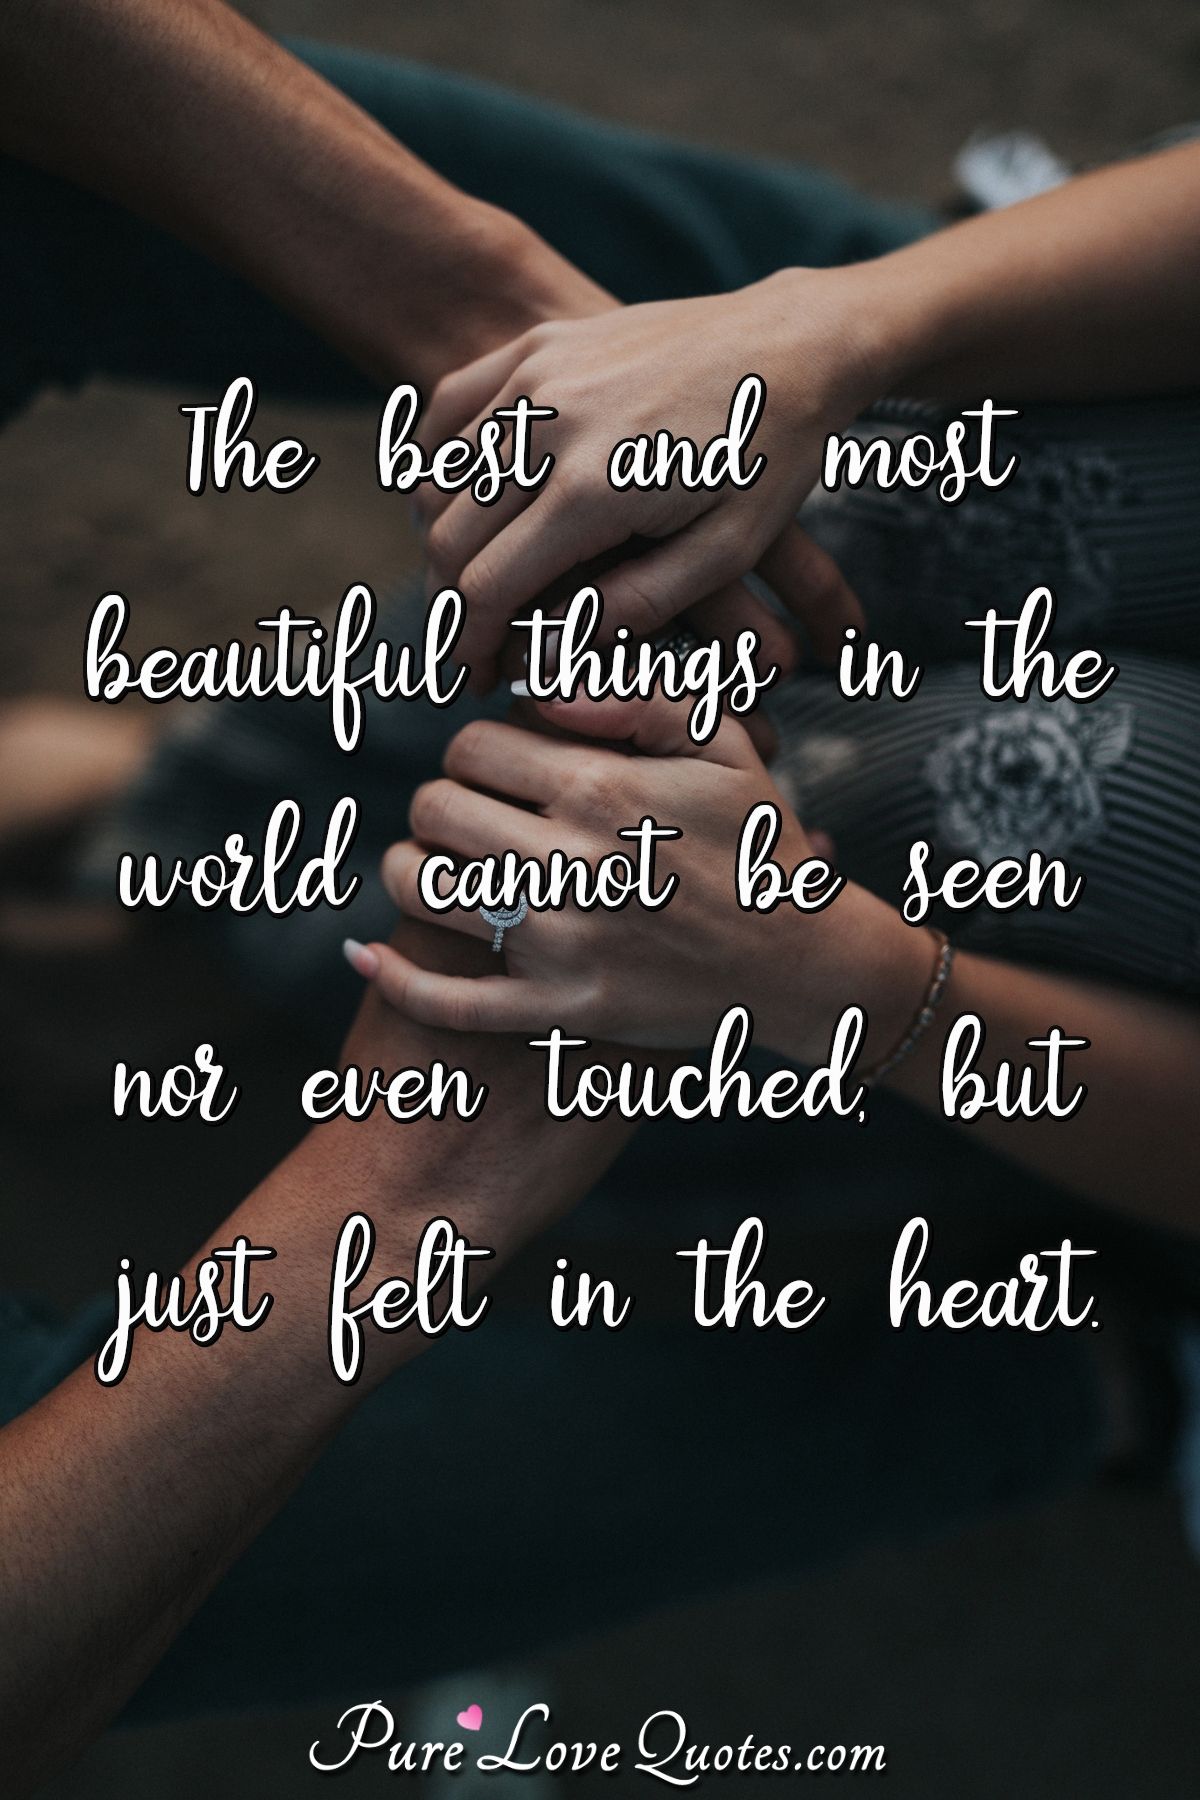 The best and most beautiful things in the world cannot be seen nor even touched, but just felt in the heart. - Unknown